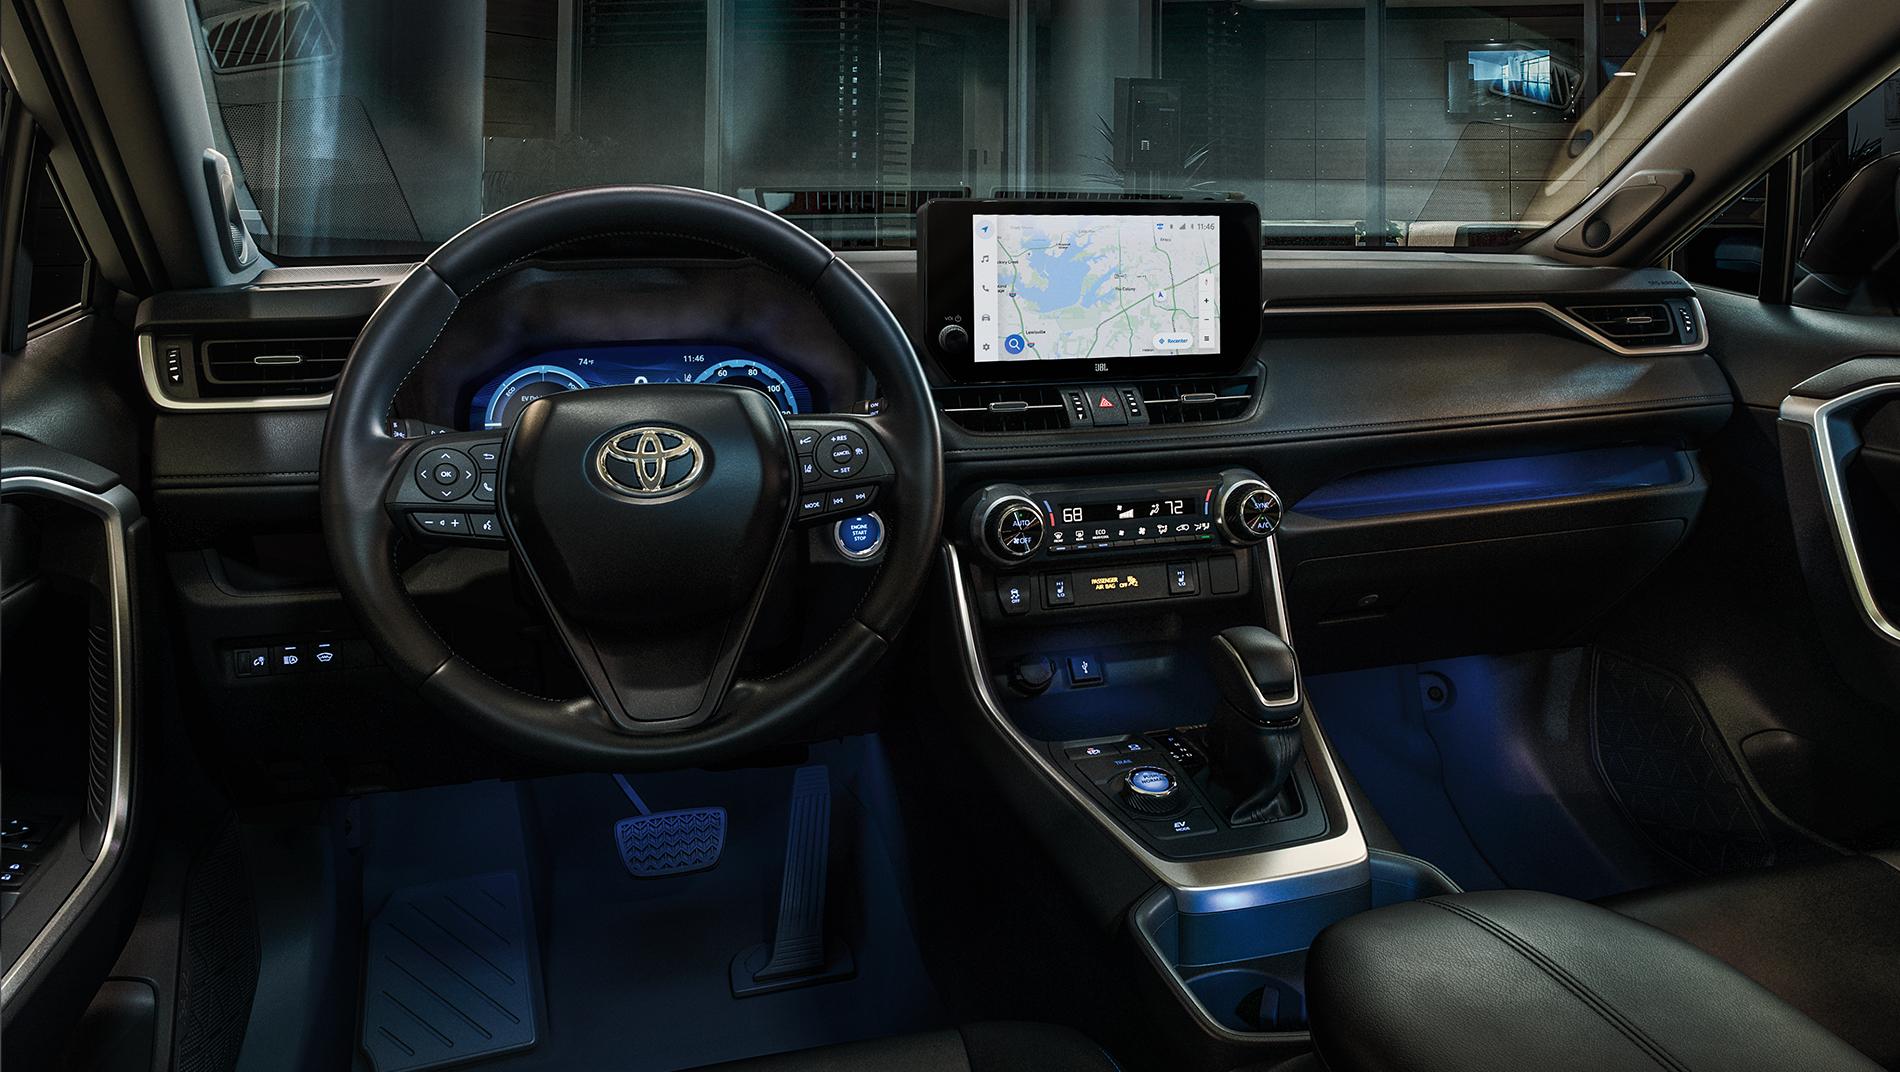 Inside a Toyota Hybrid with ambient lighting and large touchscreen controls